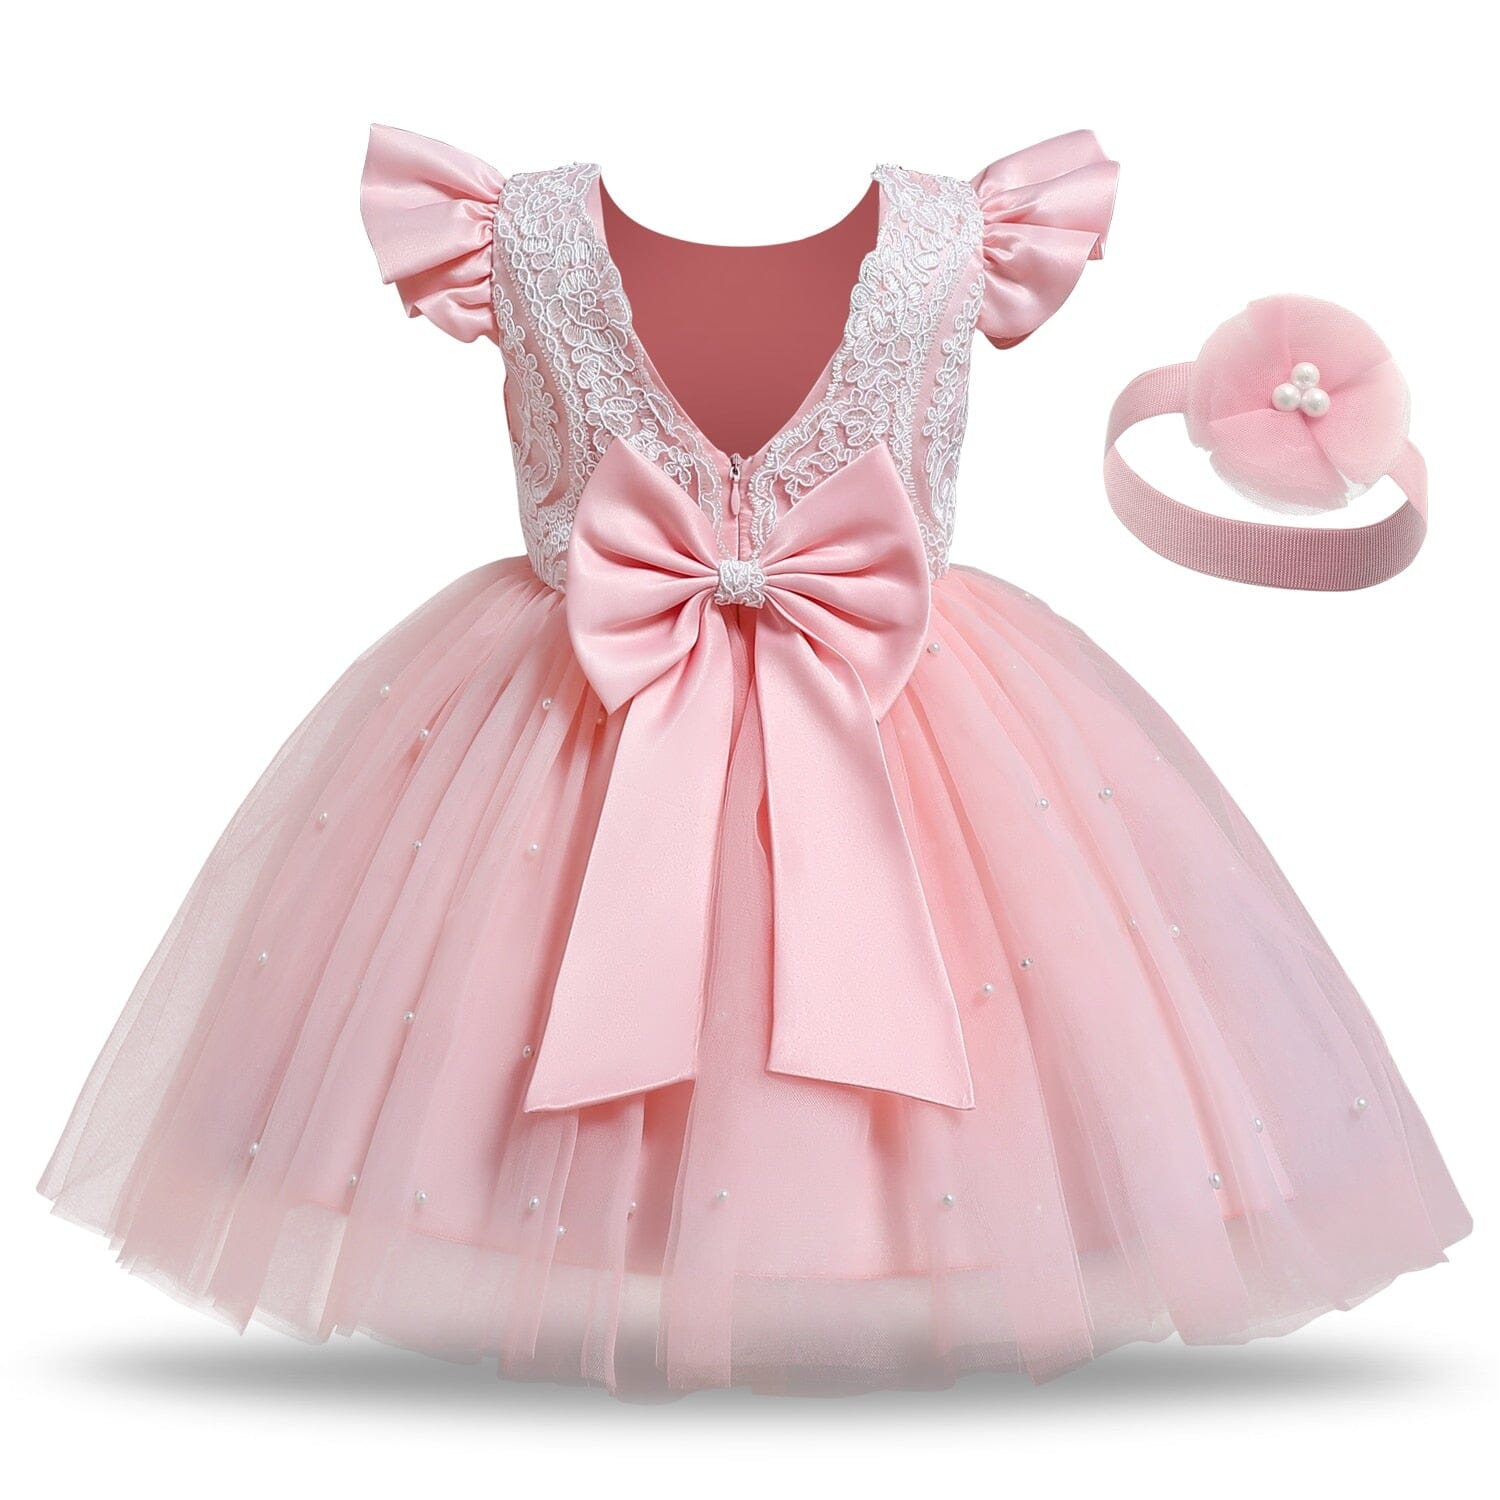 Big Bow Dress for Girls Baby & Toddler Dresses Fashionjosie Pink 3M 